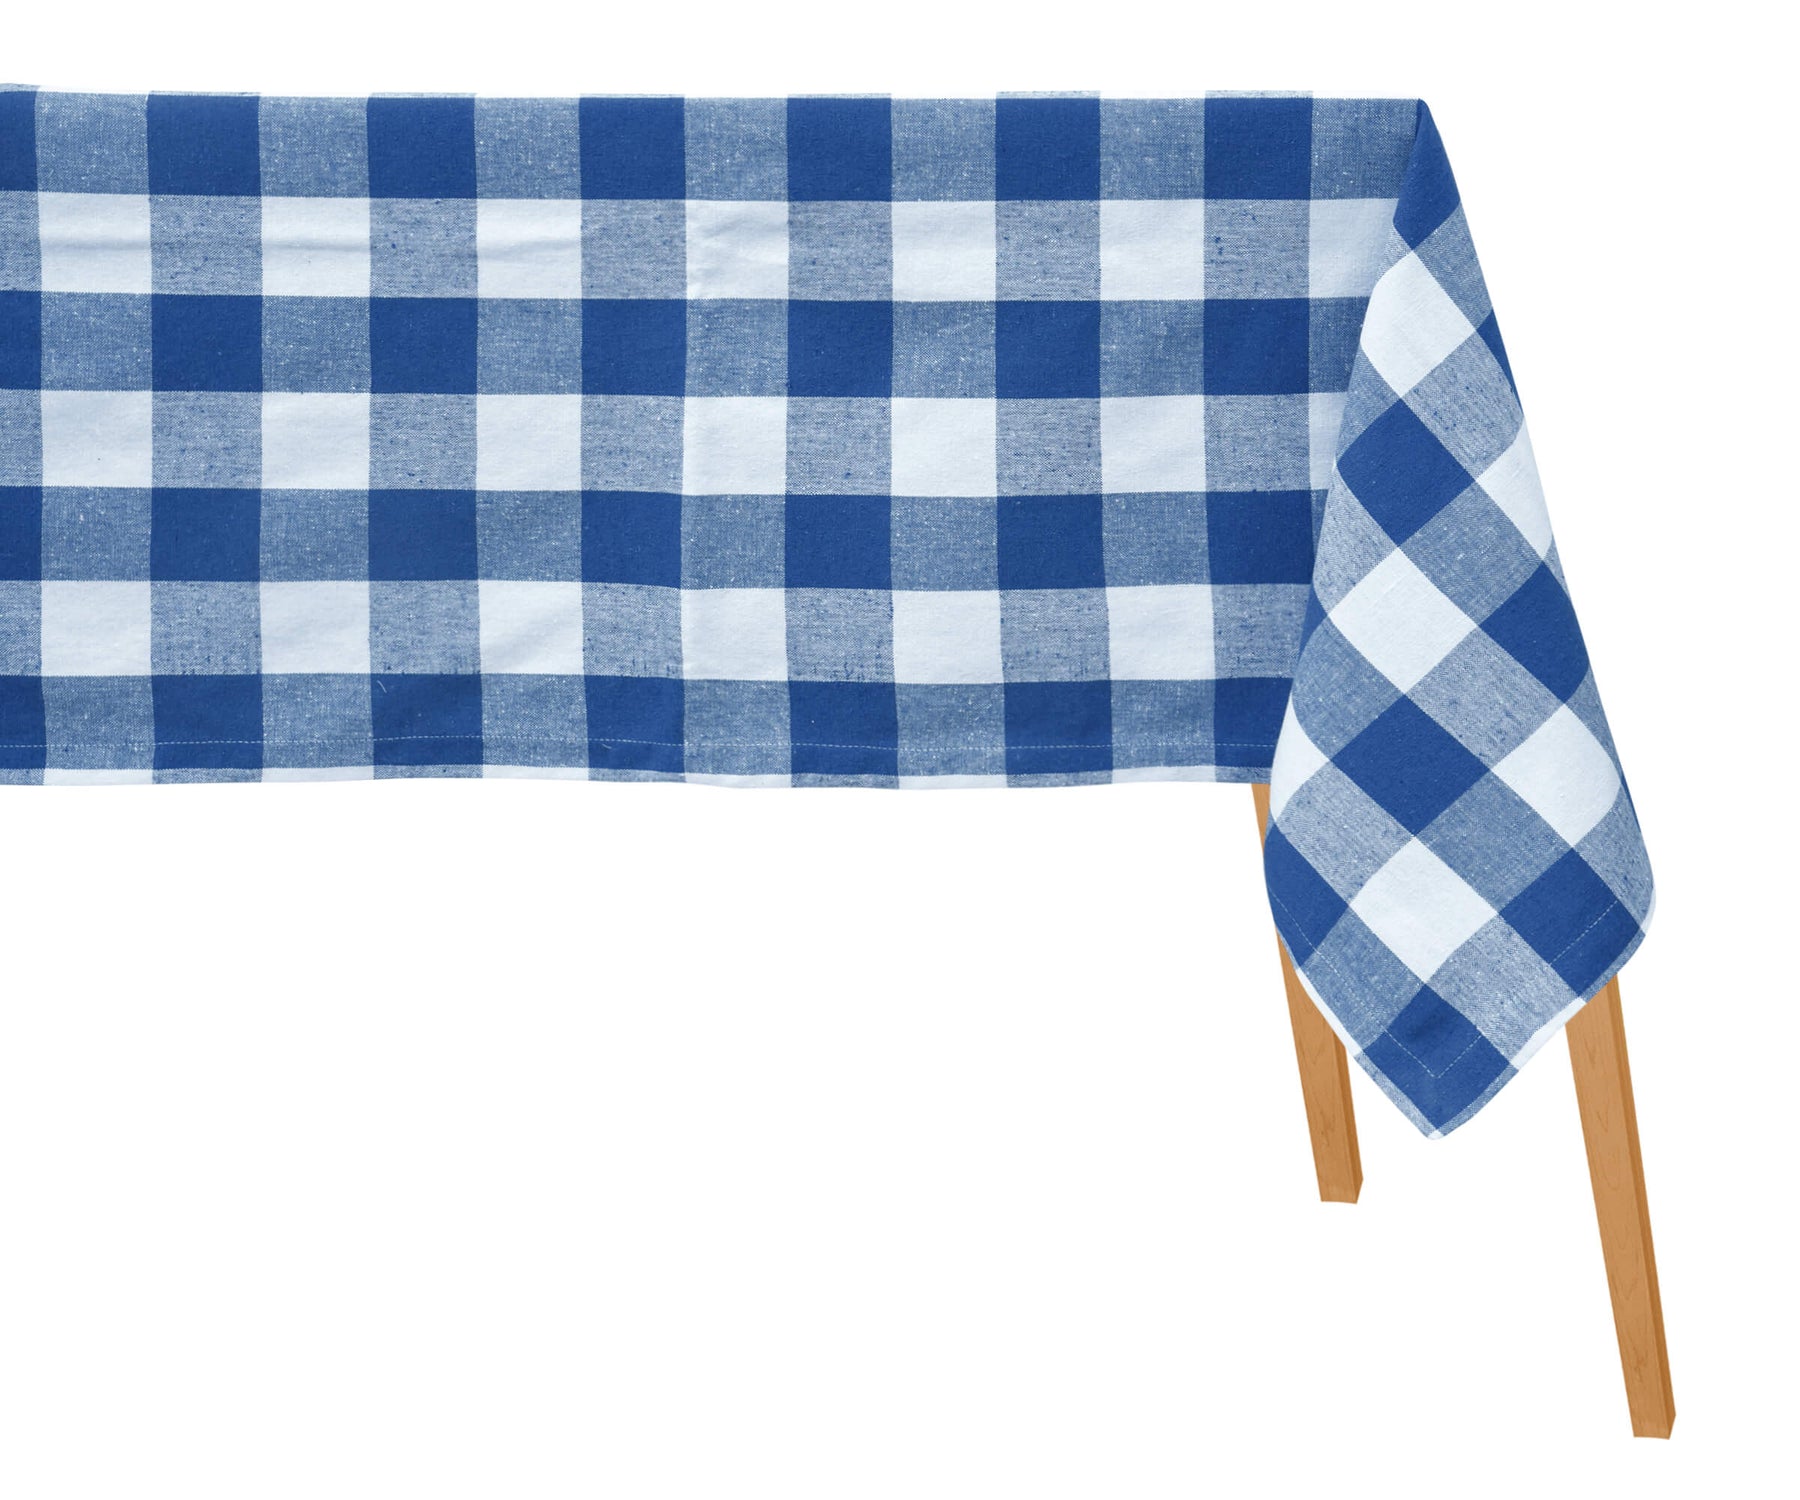 A blue and white tablecloth with subtle patterns or motifs can add visual interest without overpowering the overall décor.